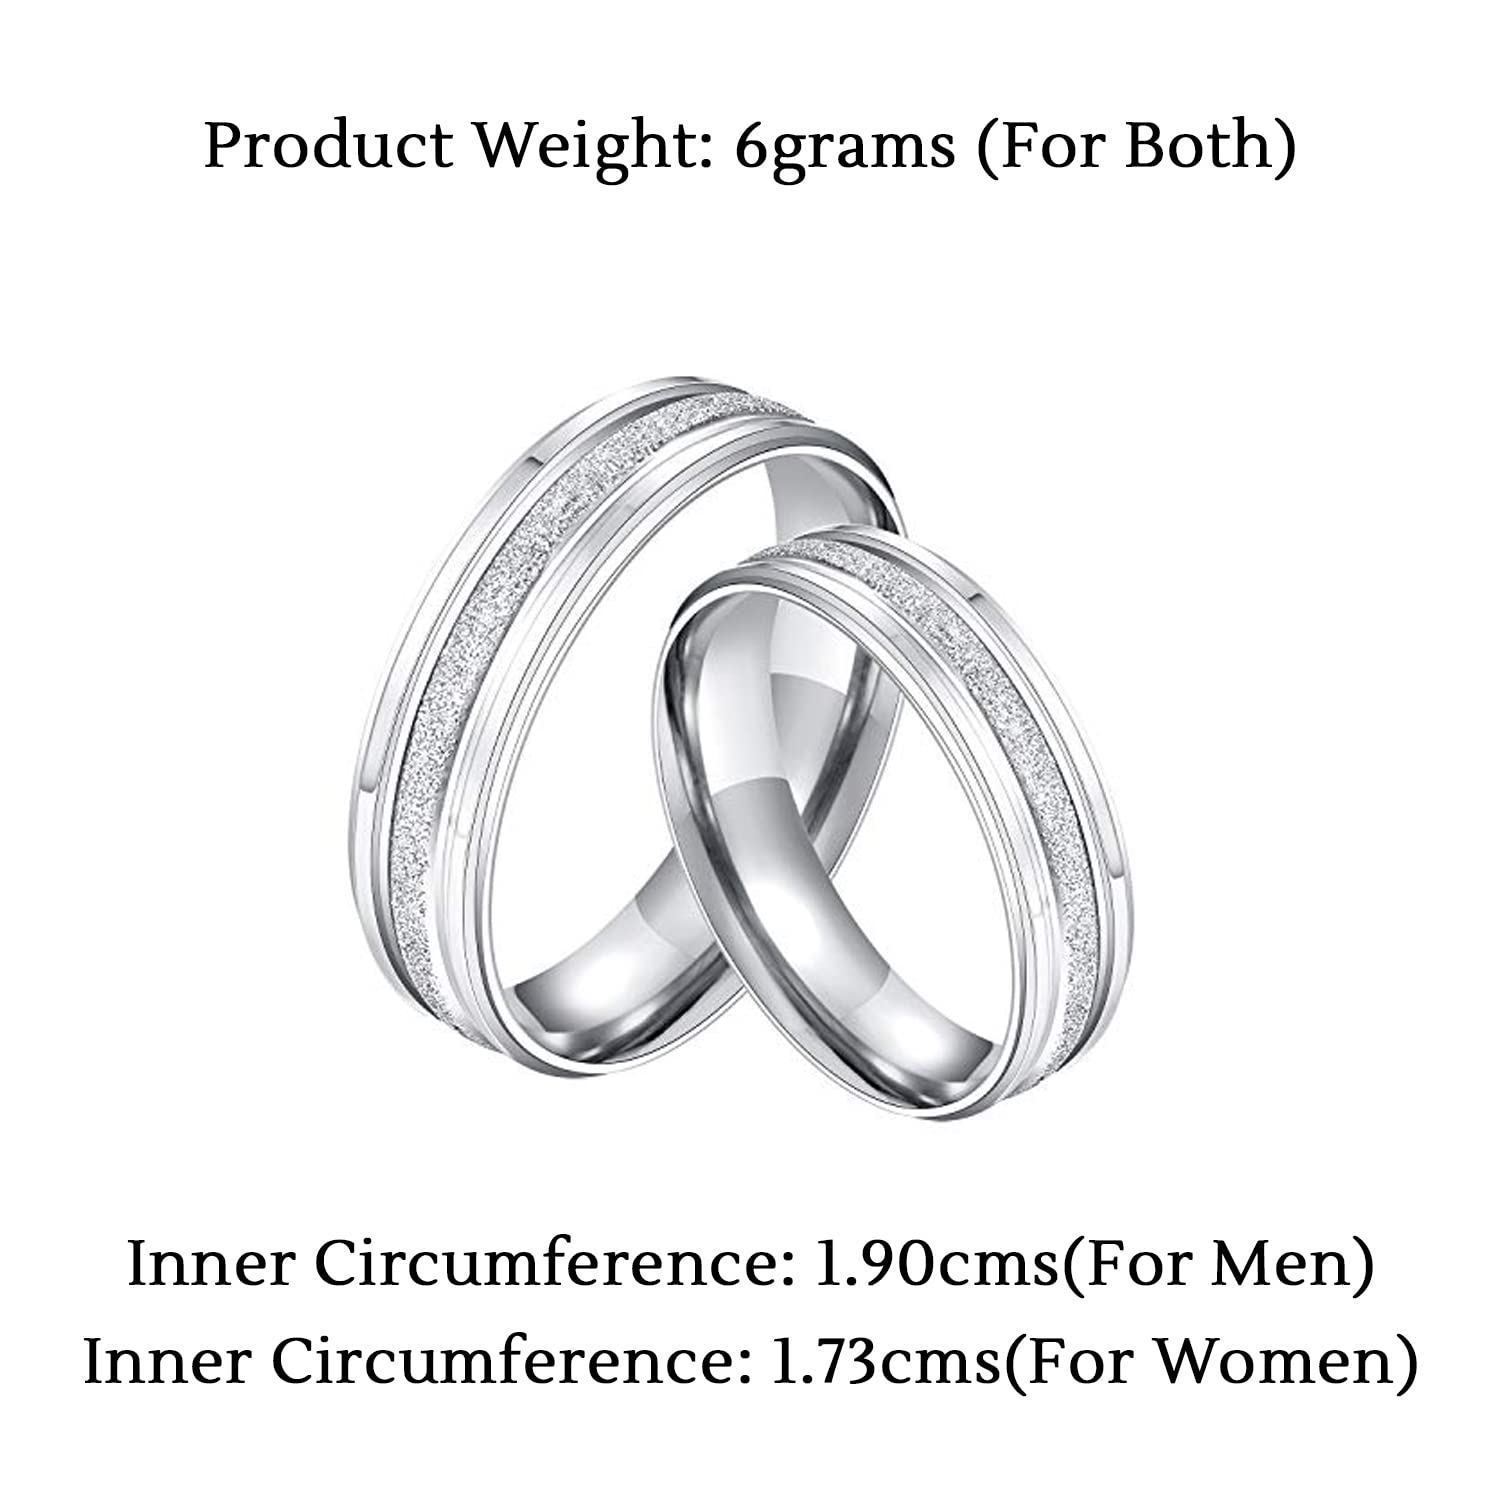 SPE Gold-Duo Leaf Design Silver Couple Ring - Poonamallee